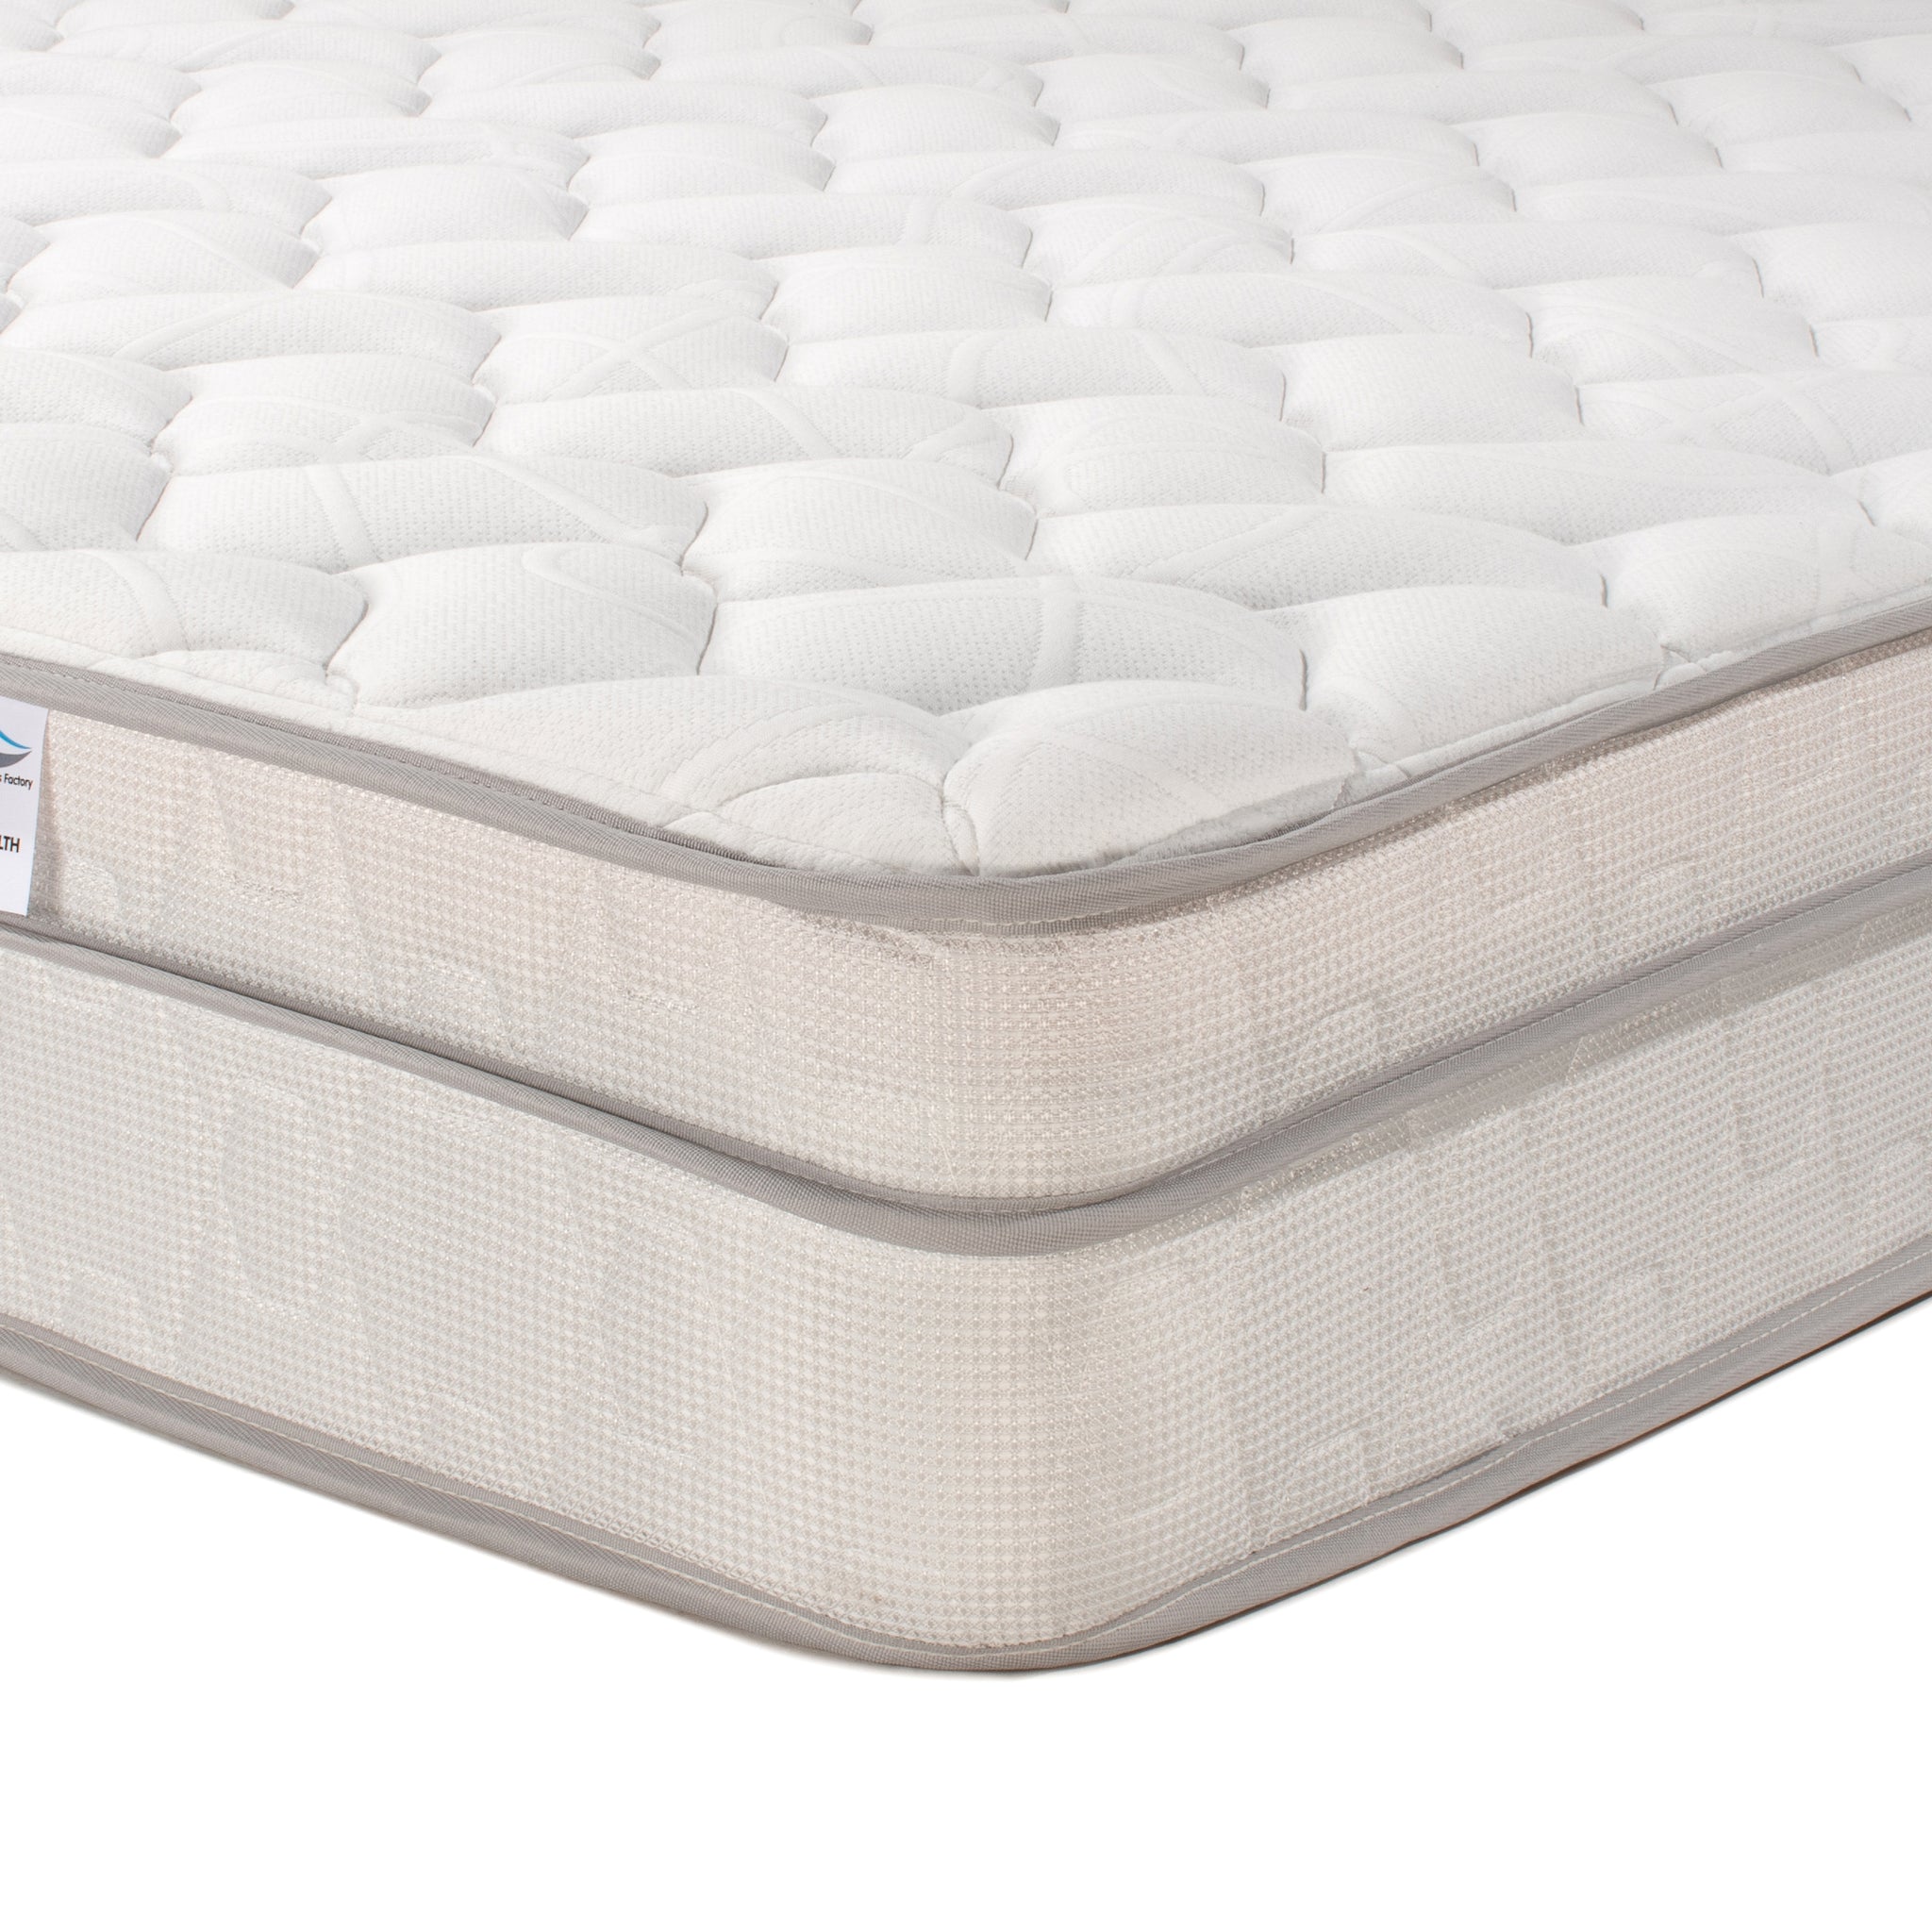 Chiro Health Double Size Innerspring Mattress - Australian Made - 5 Year Warranty - Free Delivery - Melbourne Mattress Factory